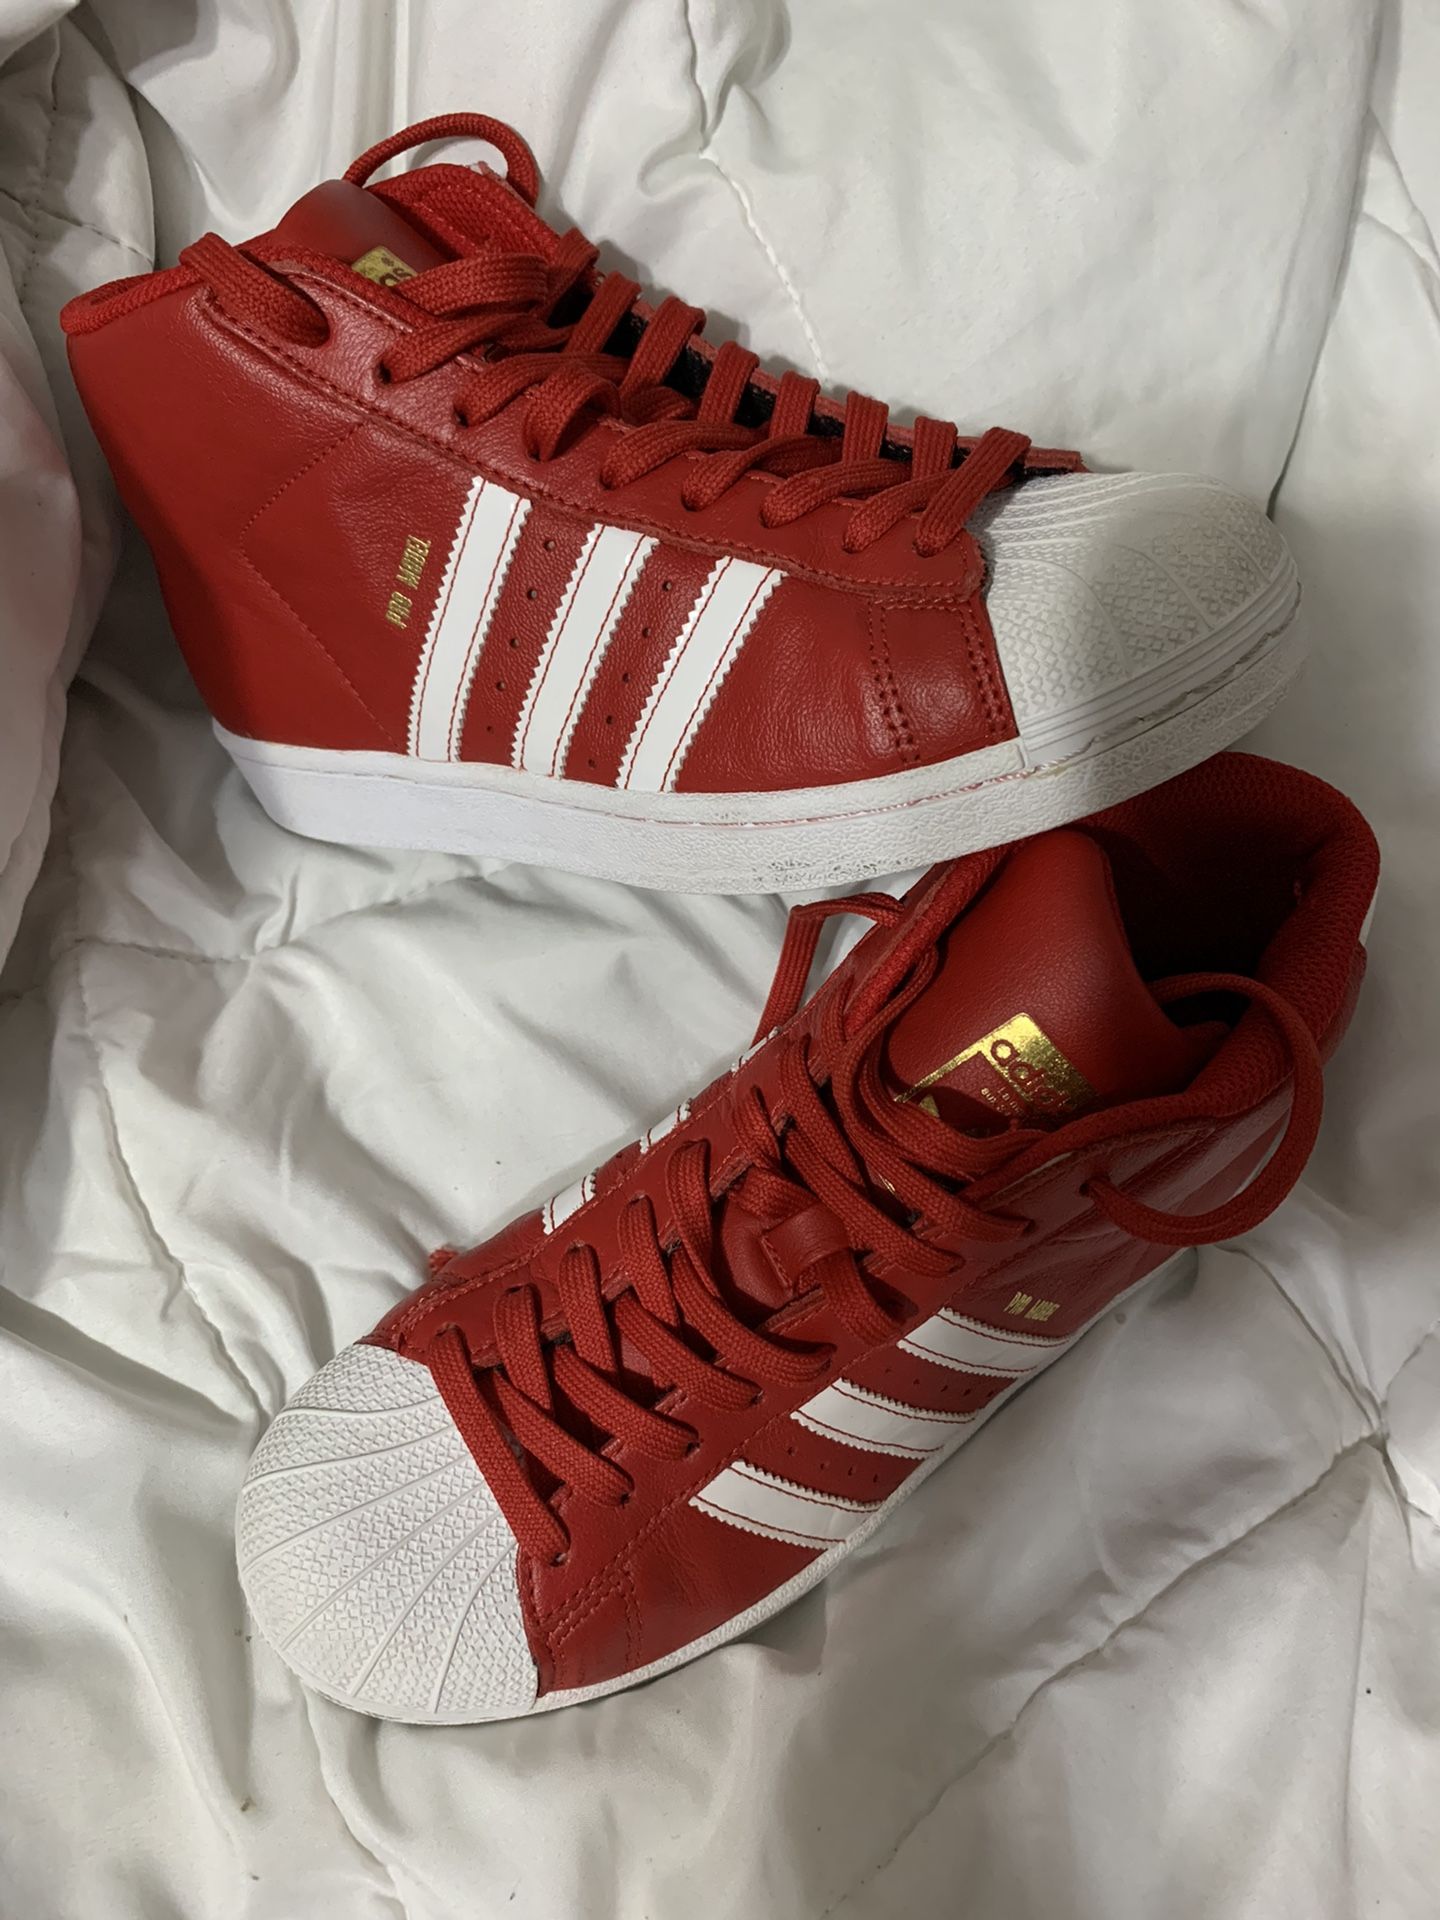 Addidas High Tops Size 5